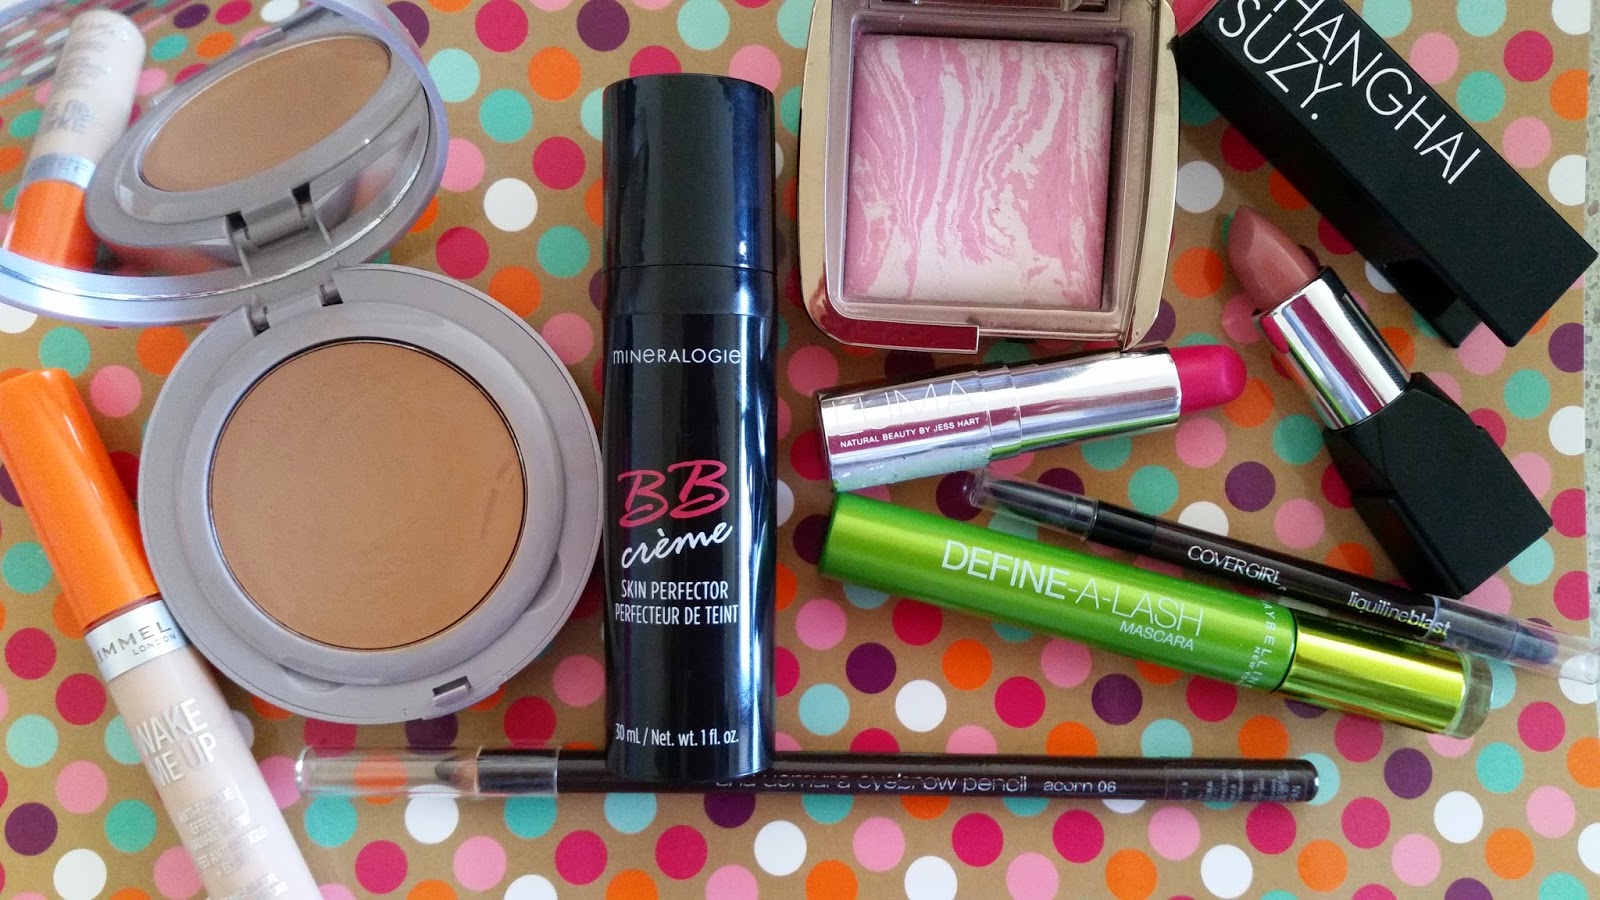 Beautifully Glossy: This weeks face